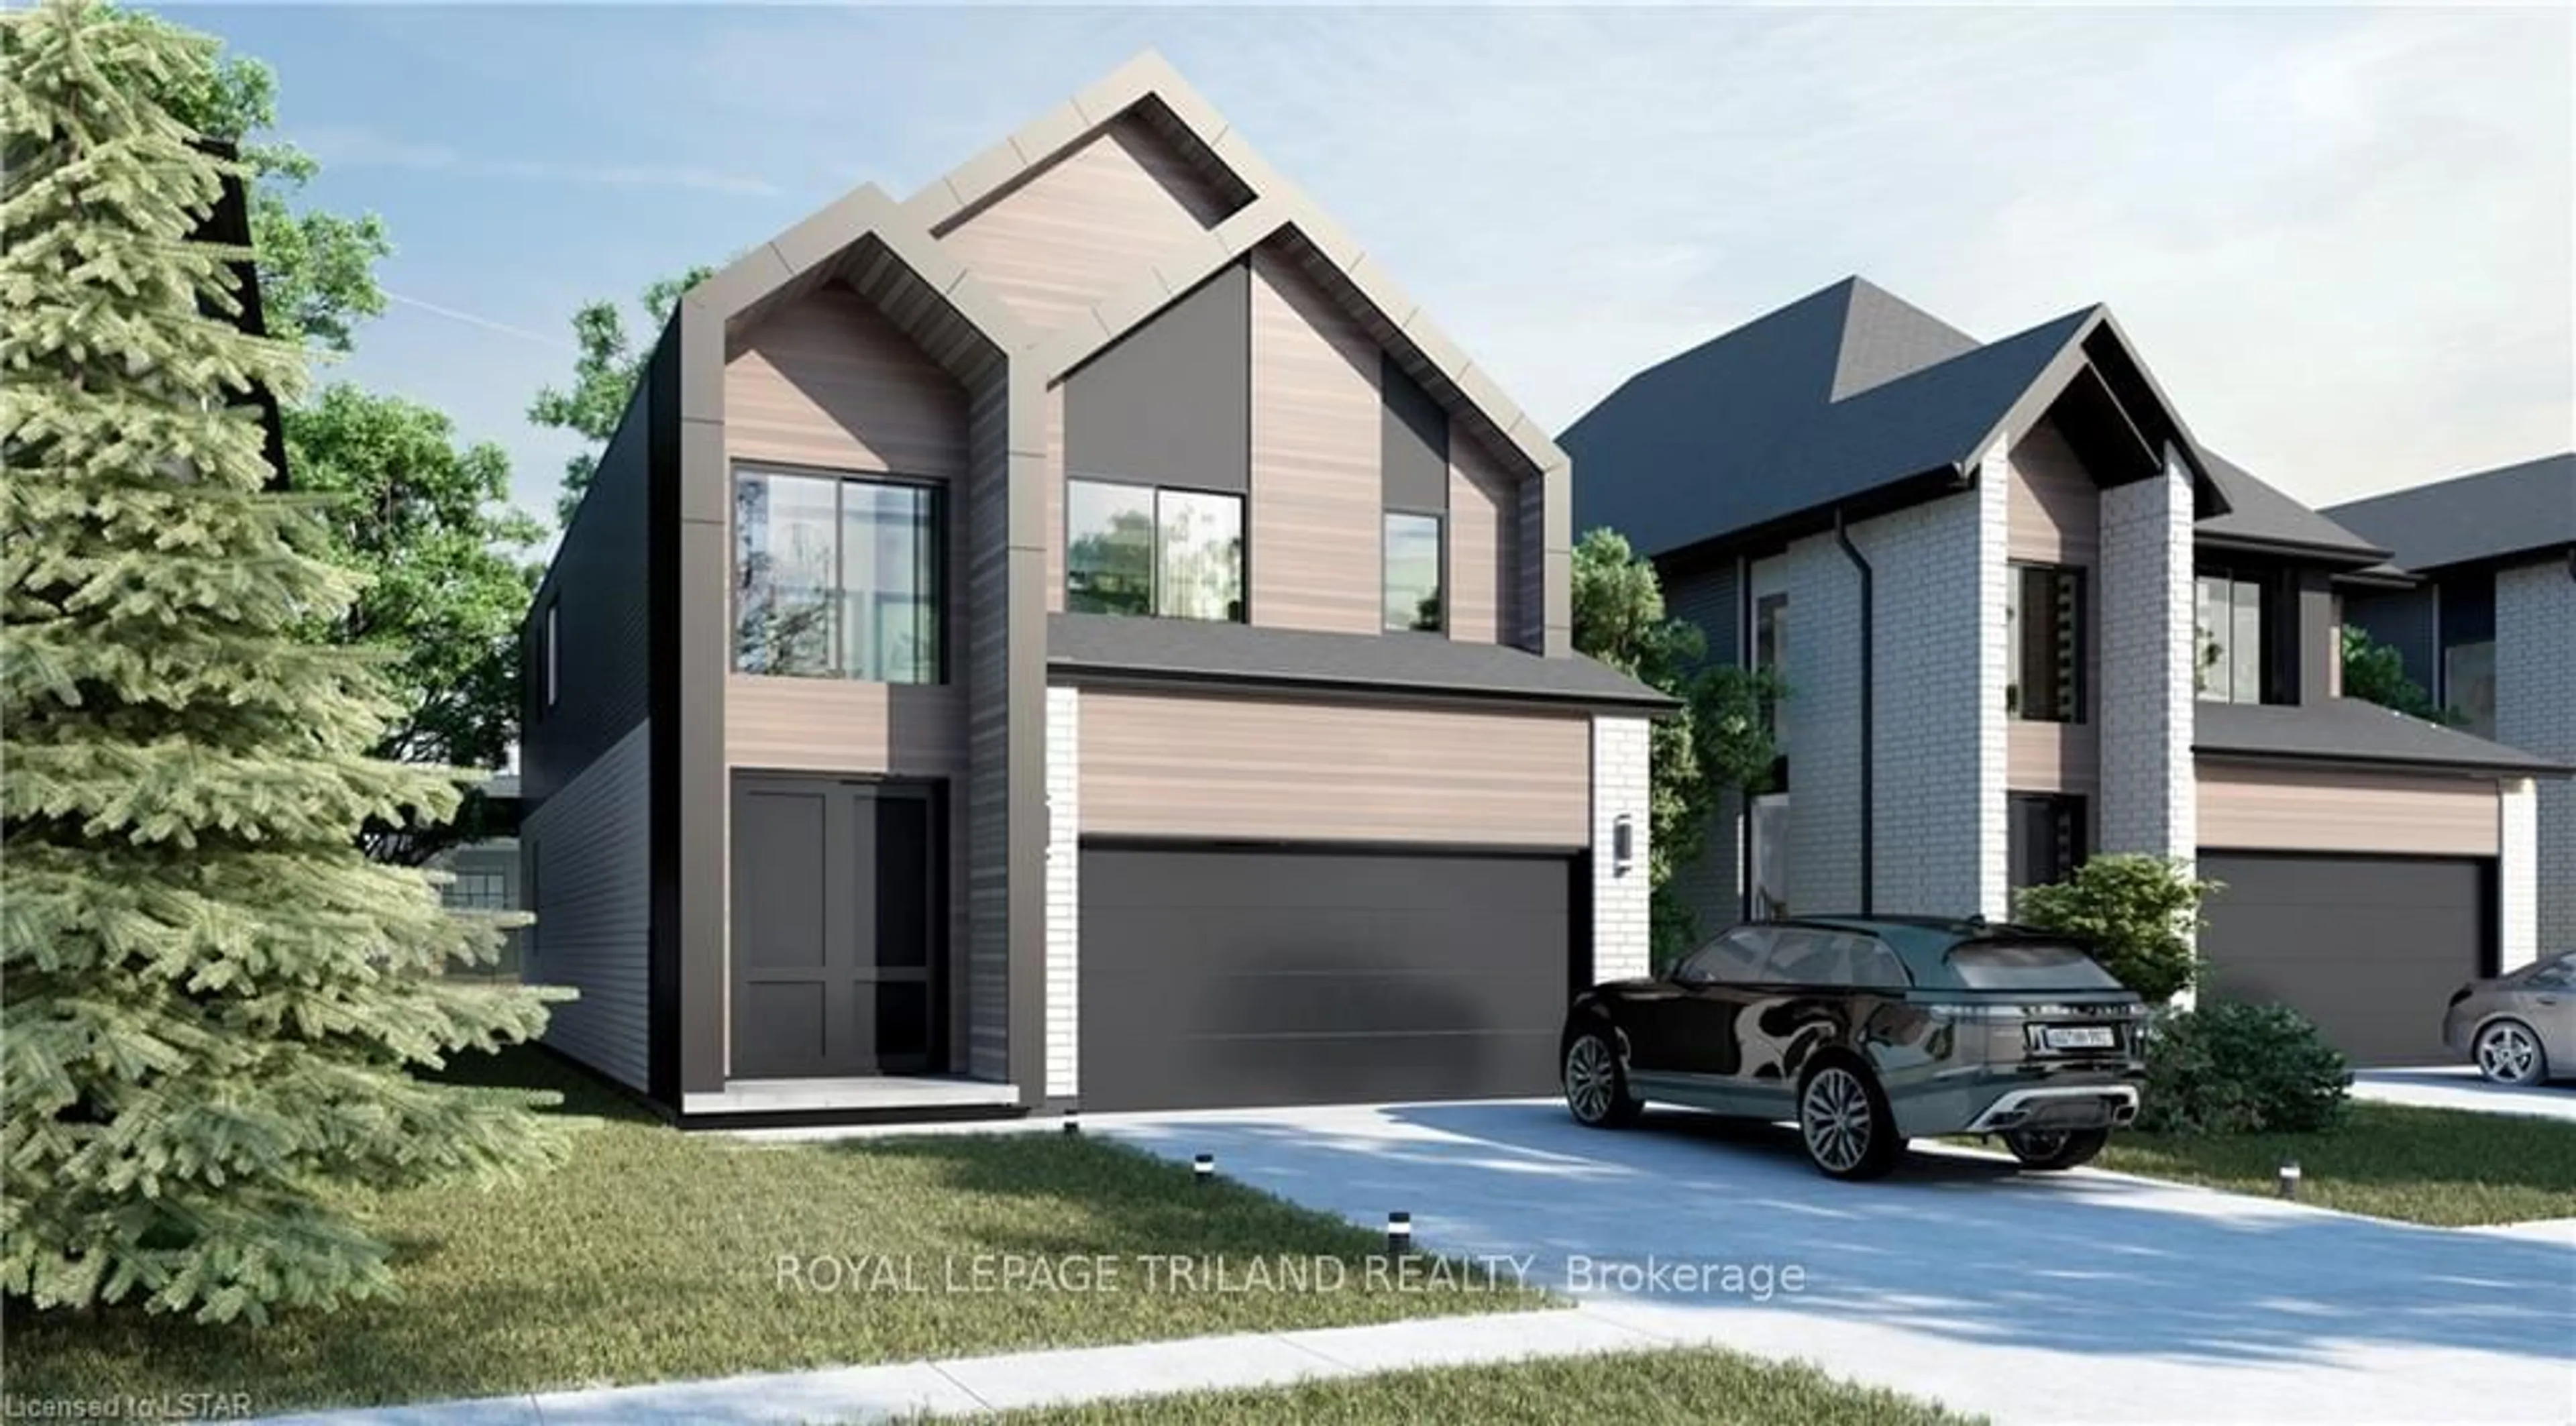 Home with brick exterior material for 3915 Big Leaf Tr, London Ontario N6P 0A3